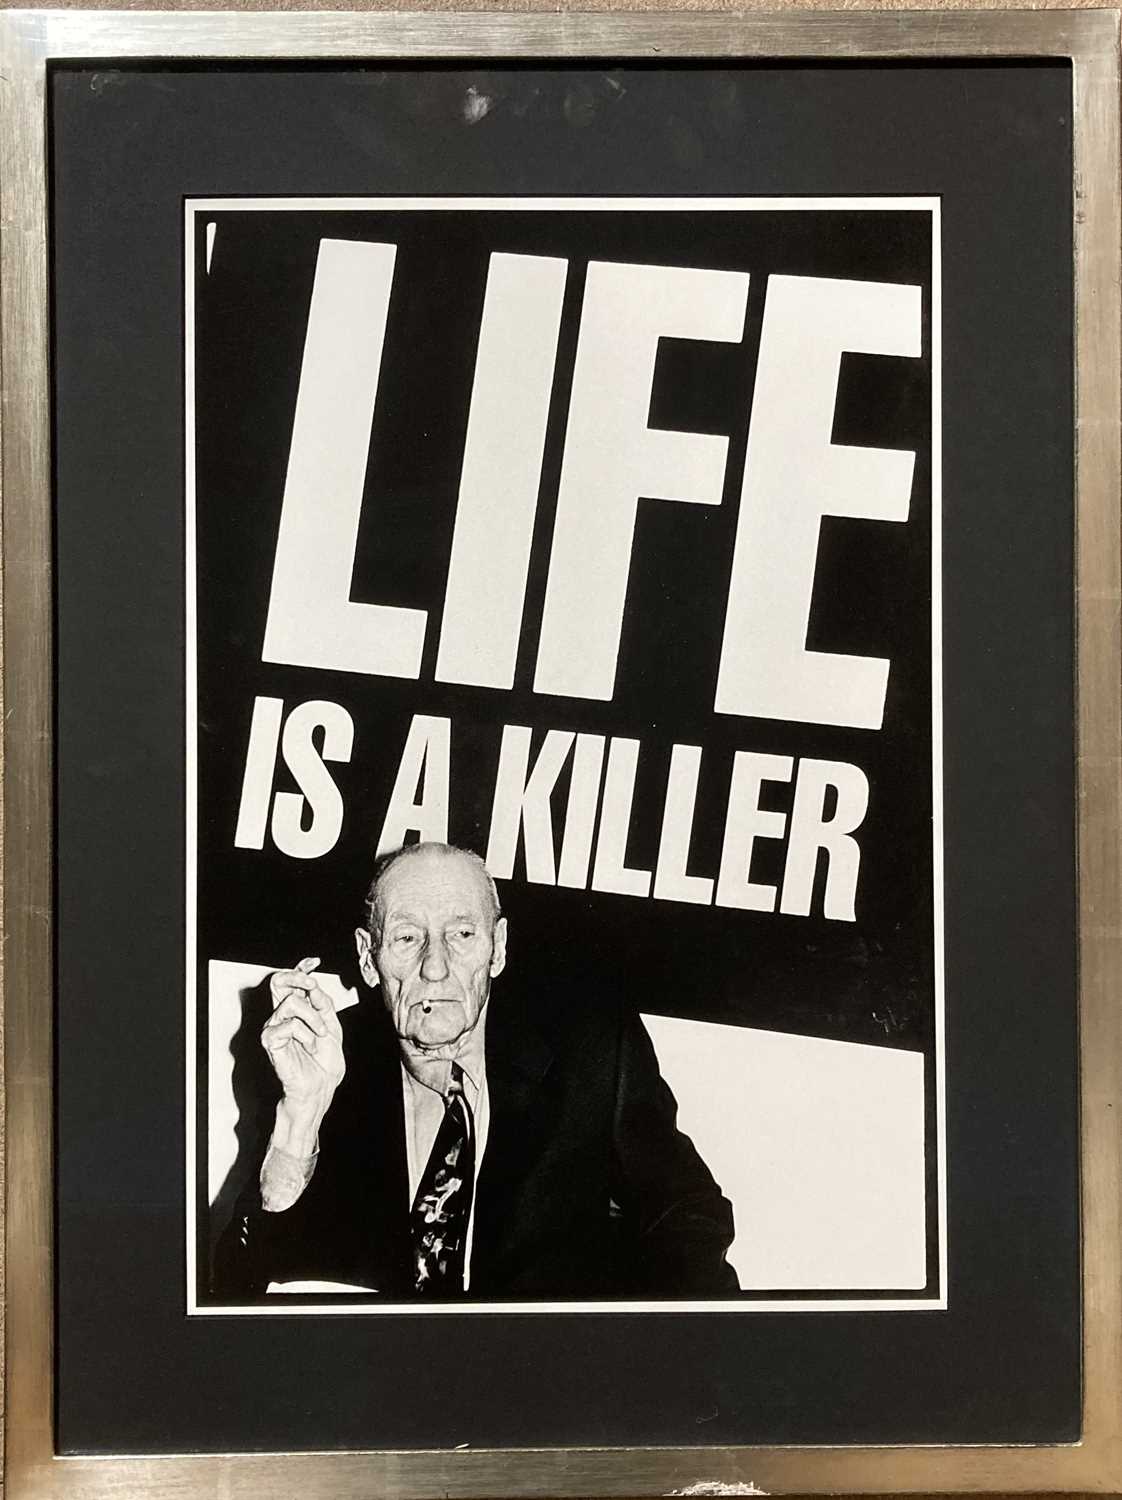 Lot 316 - WILLIAM BURROUGHS - LIFE IS A KILLER POSTER.